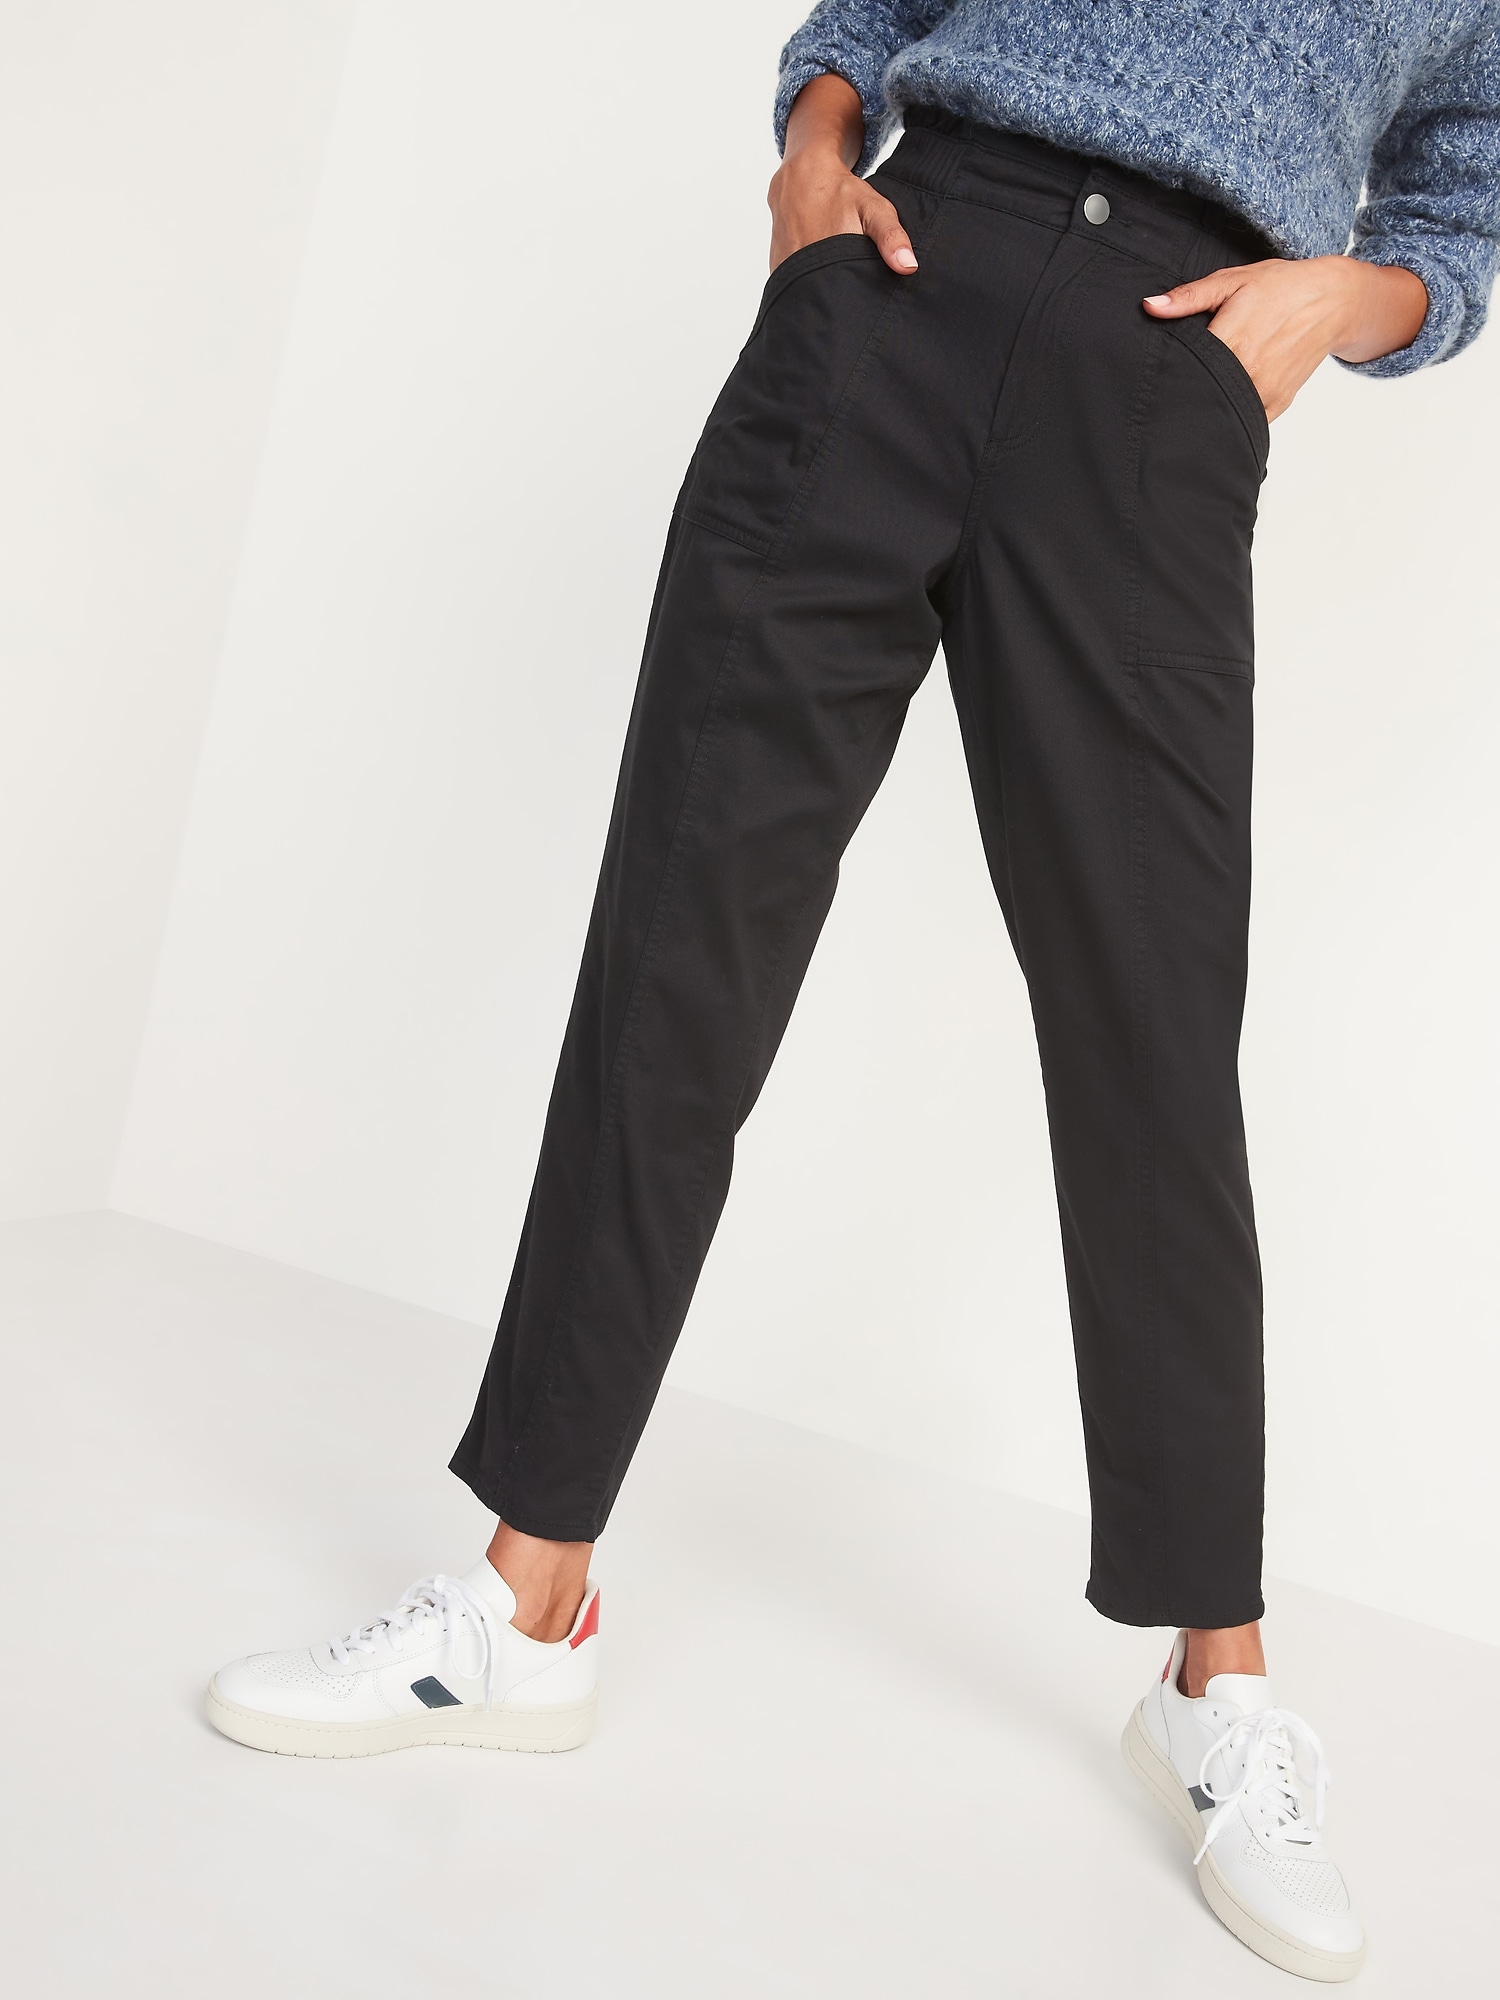 womens relaxed fit pants